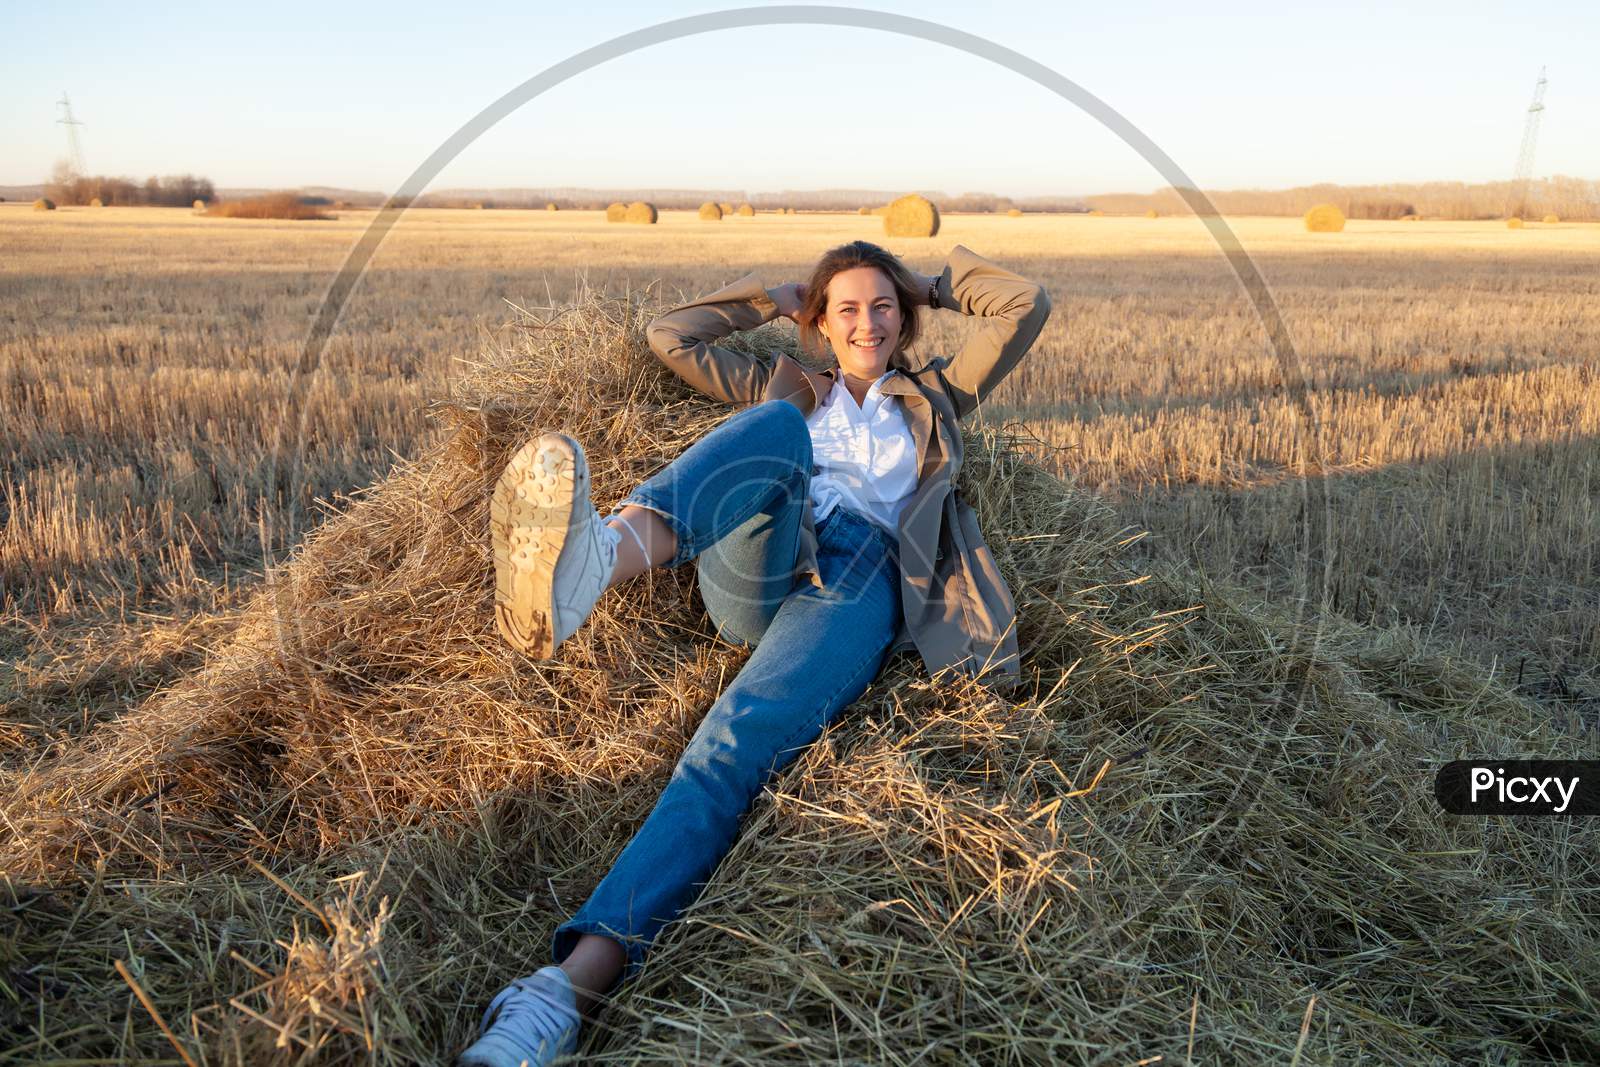 The Concept Of Livestyle  Outdoor In Autumn. Close Up Of A Young Woman Student In A Warm Autumn Clothes Looking Funny, Smilling, Posing, Lying On Haystick Around Field